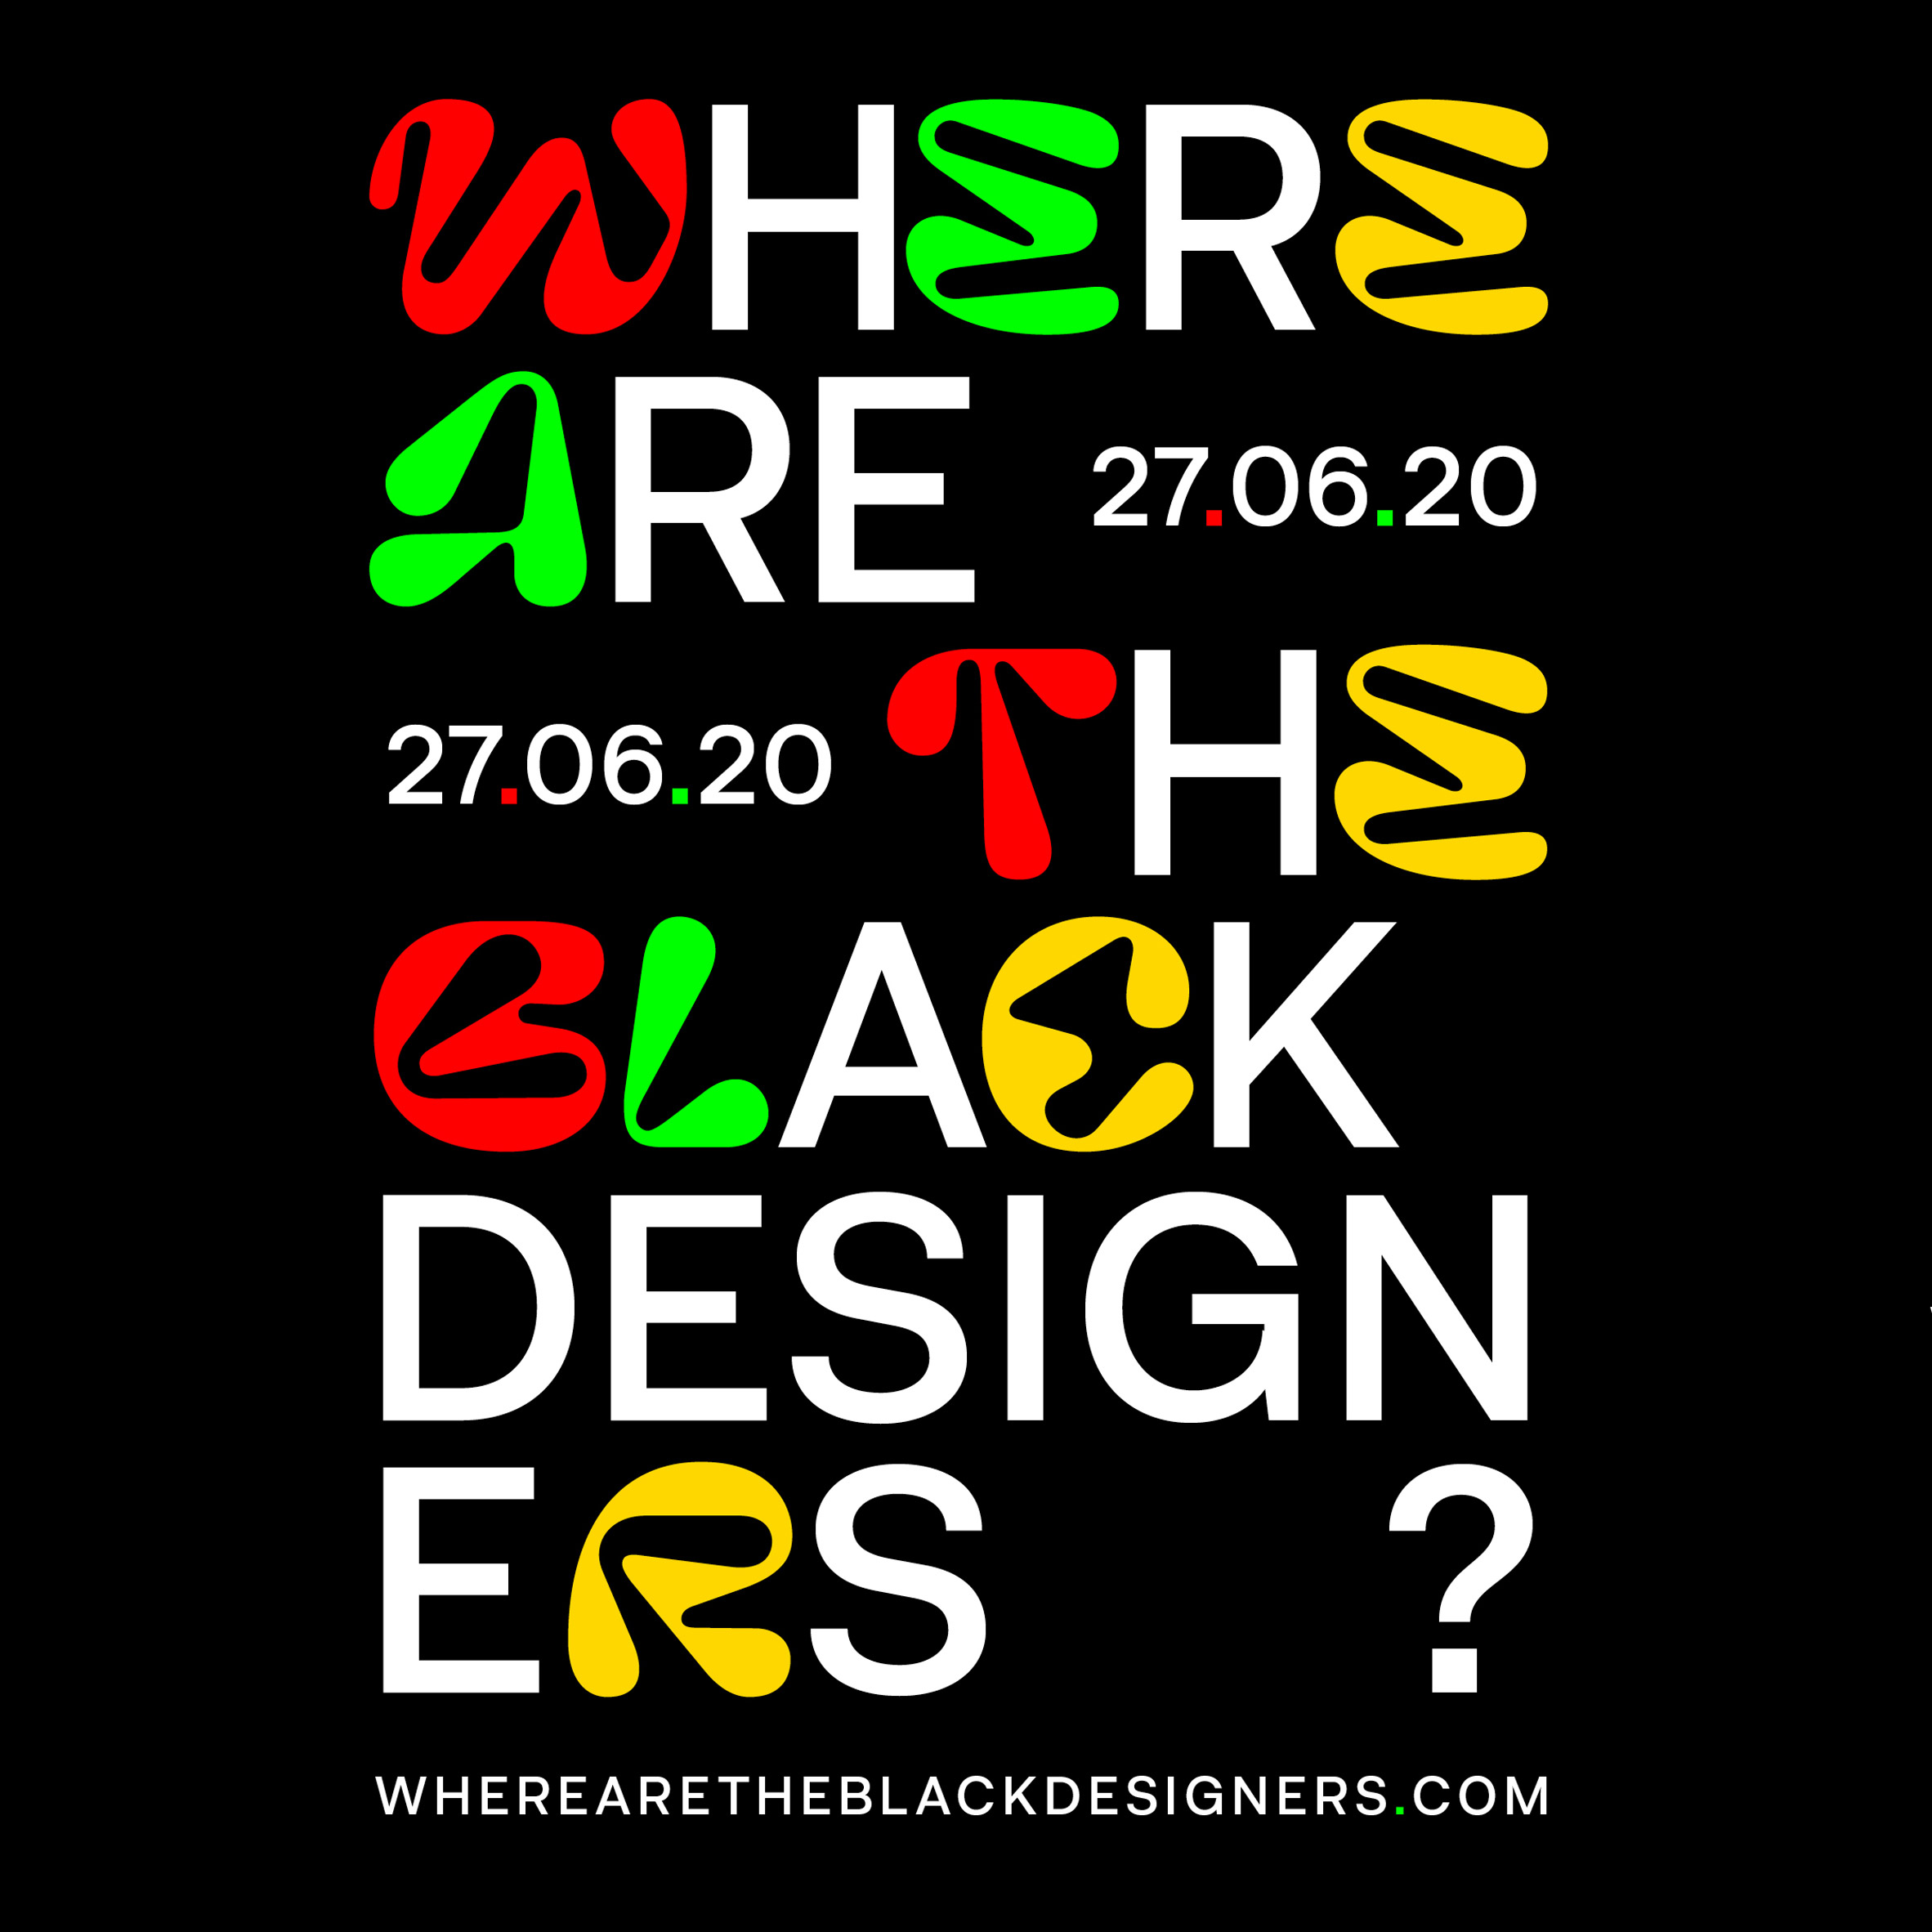 "Hire black designers first and foremost," say organisers of anti-racism conference